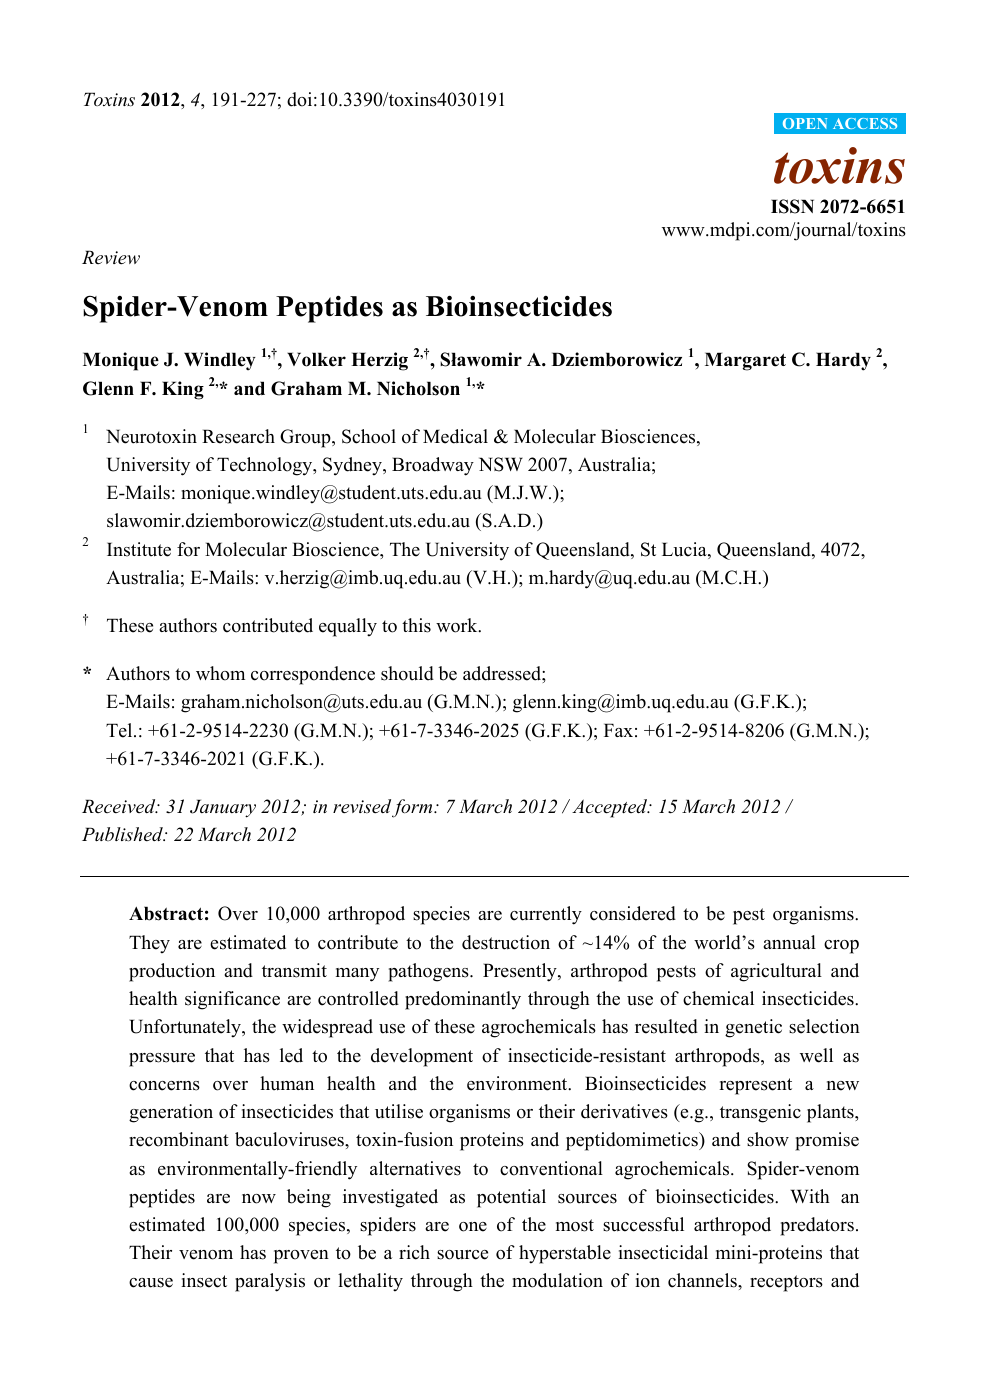 Spider Venom Peptides As Bioinsecticides Topic Of Research Paper In Biological Sciences Download Scholarly Article Pdf And Read For Free On Cyberleninka Open Science Hub